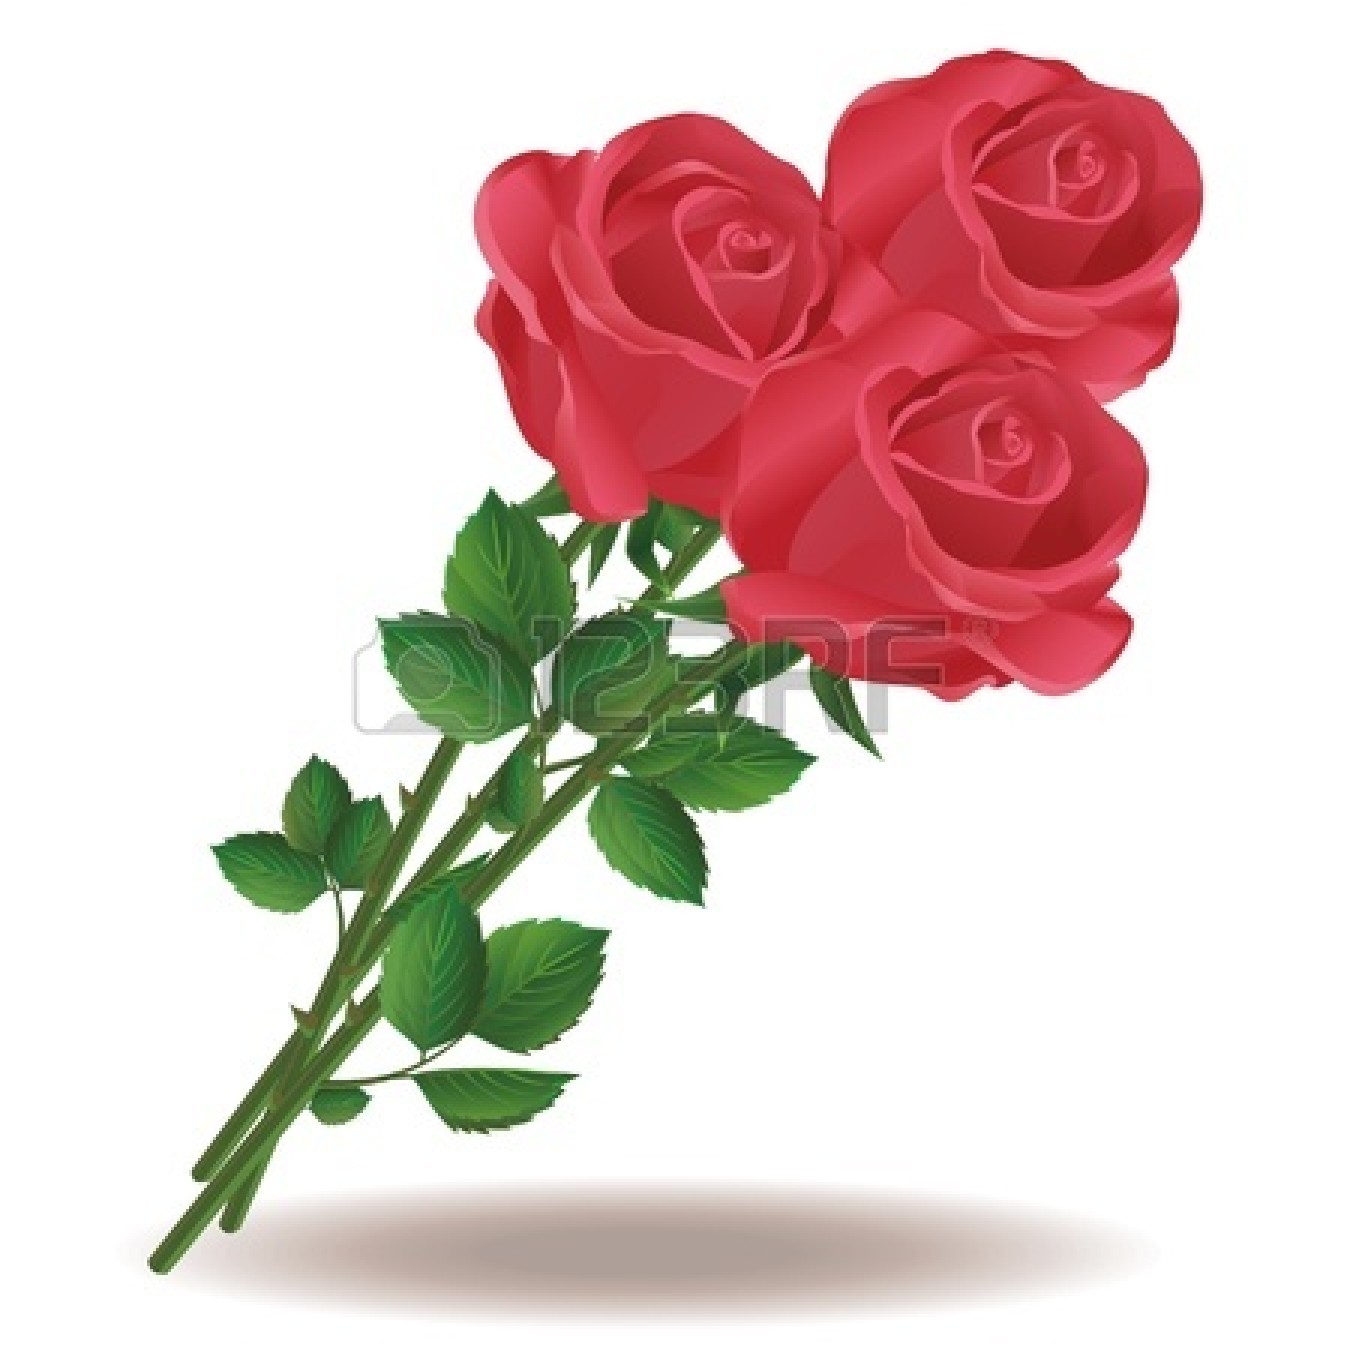 Bouquet Of Roses Clipart   Clipart Panda   Free Clipart Images